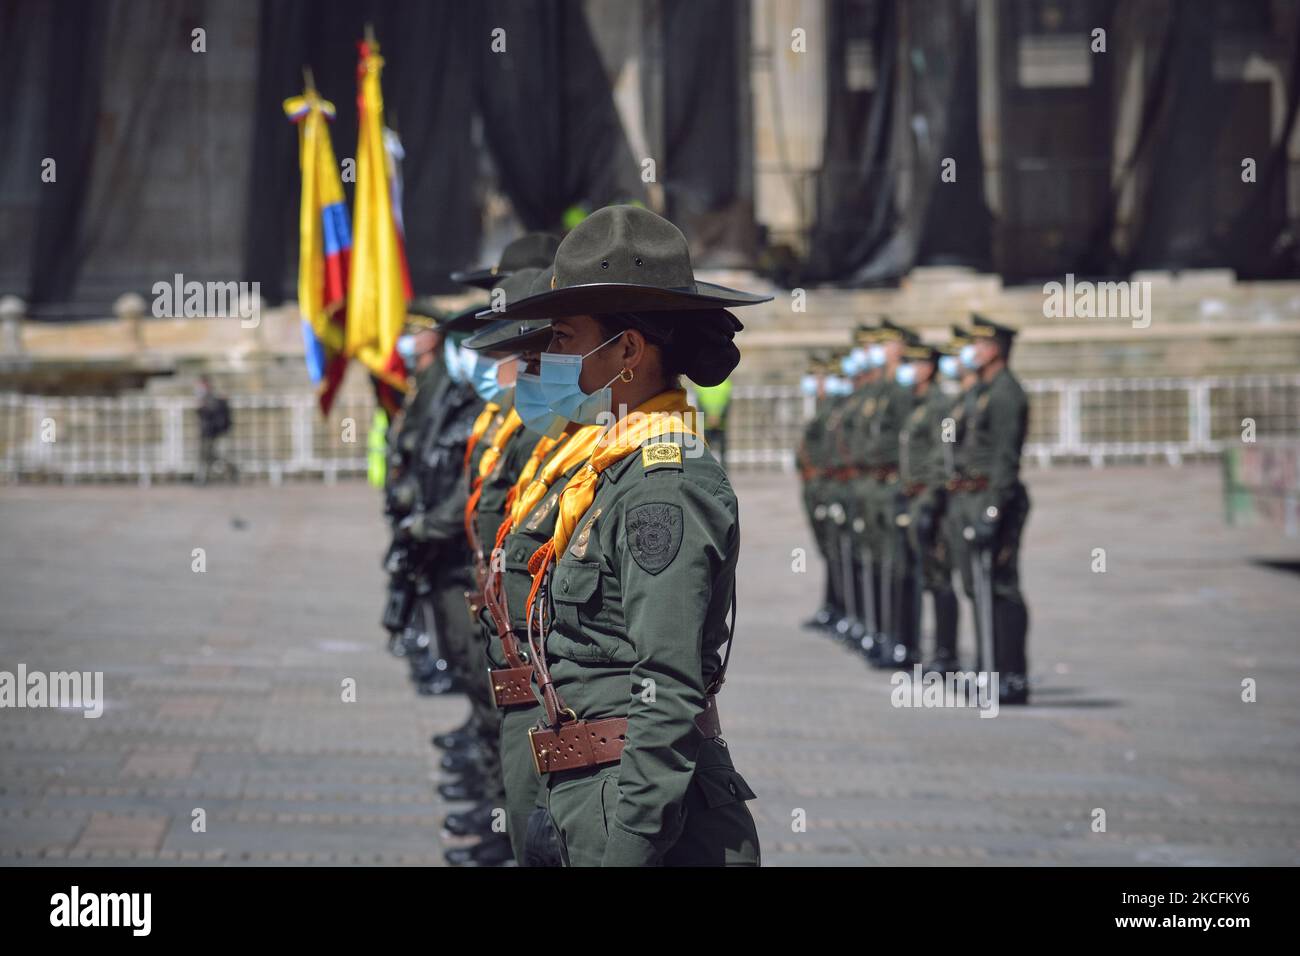 Female members of the national police attend the taking office ceremony of the new commander of the national police in Bogota, on June 4, 2021.(Photo by Vannessa Jimenez G/NurPhoto) Stock Photo